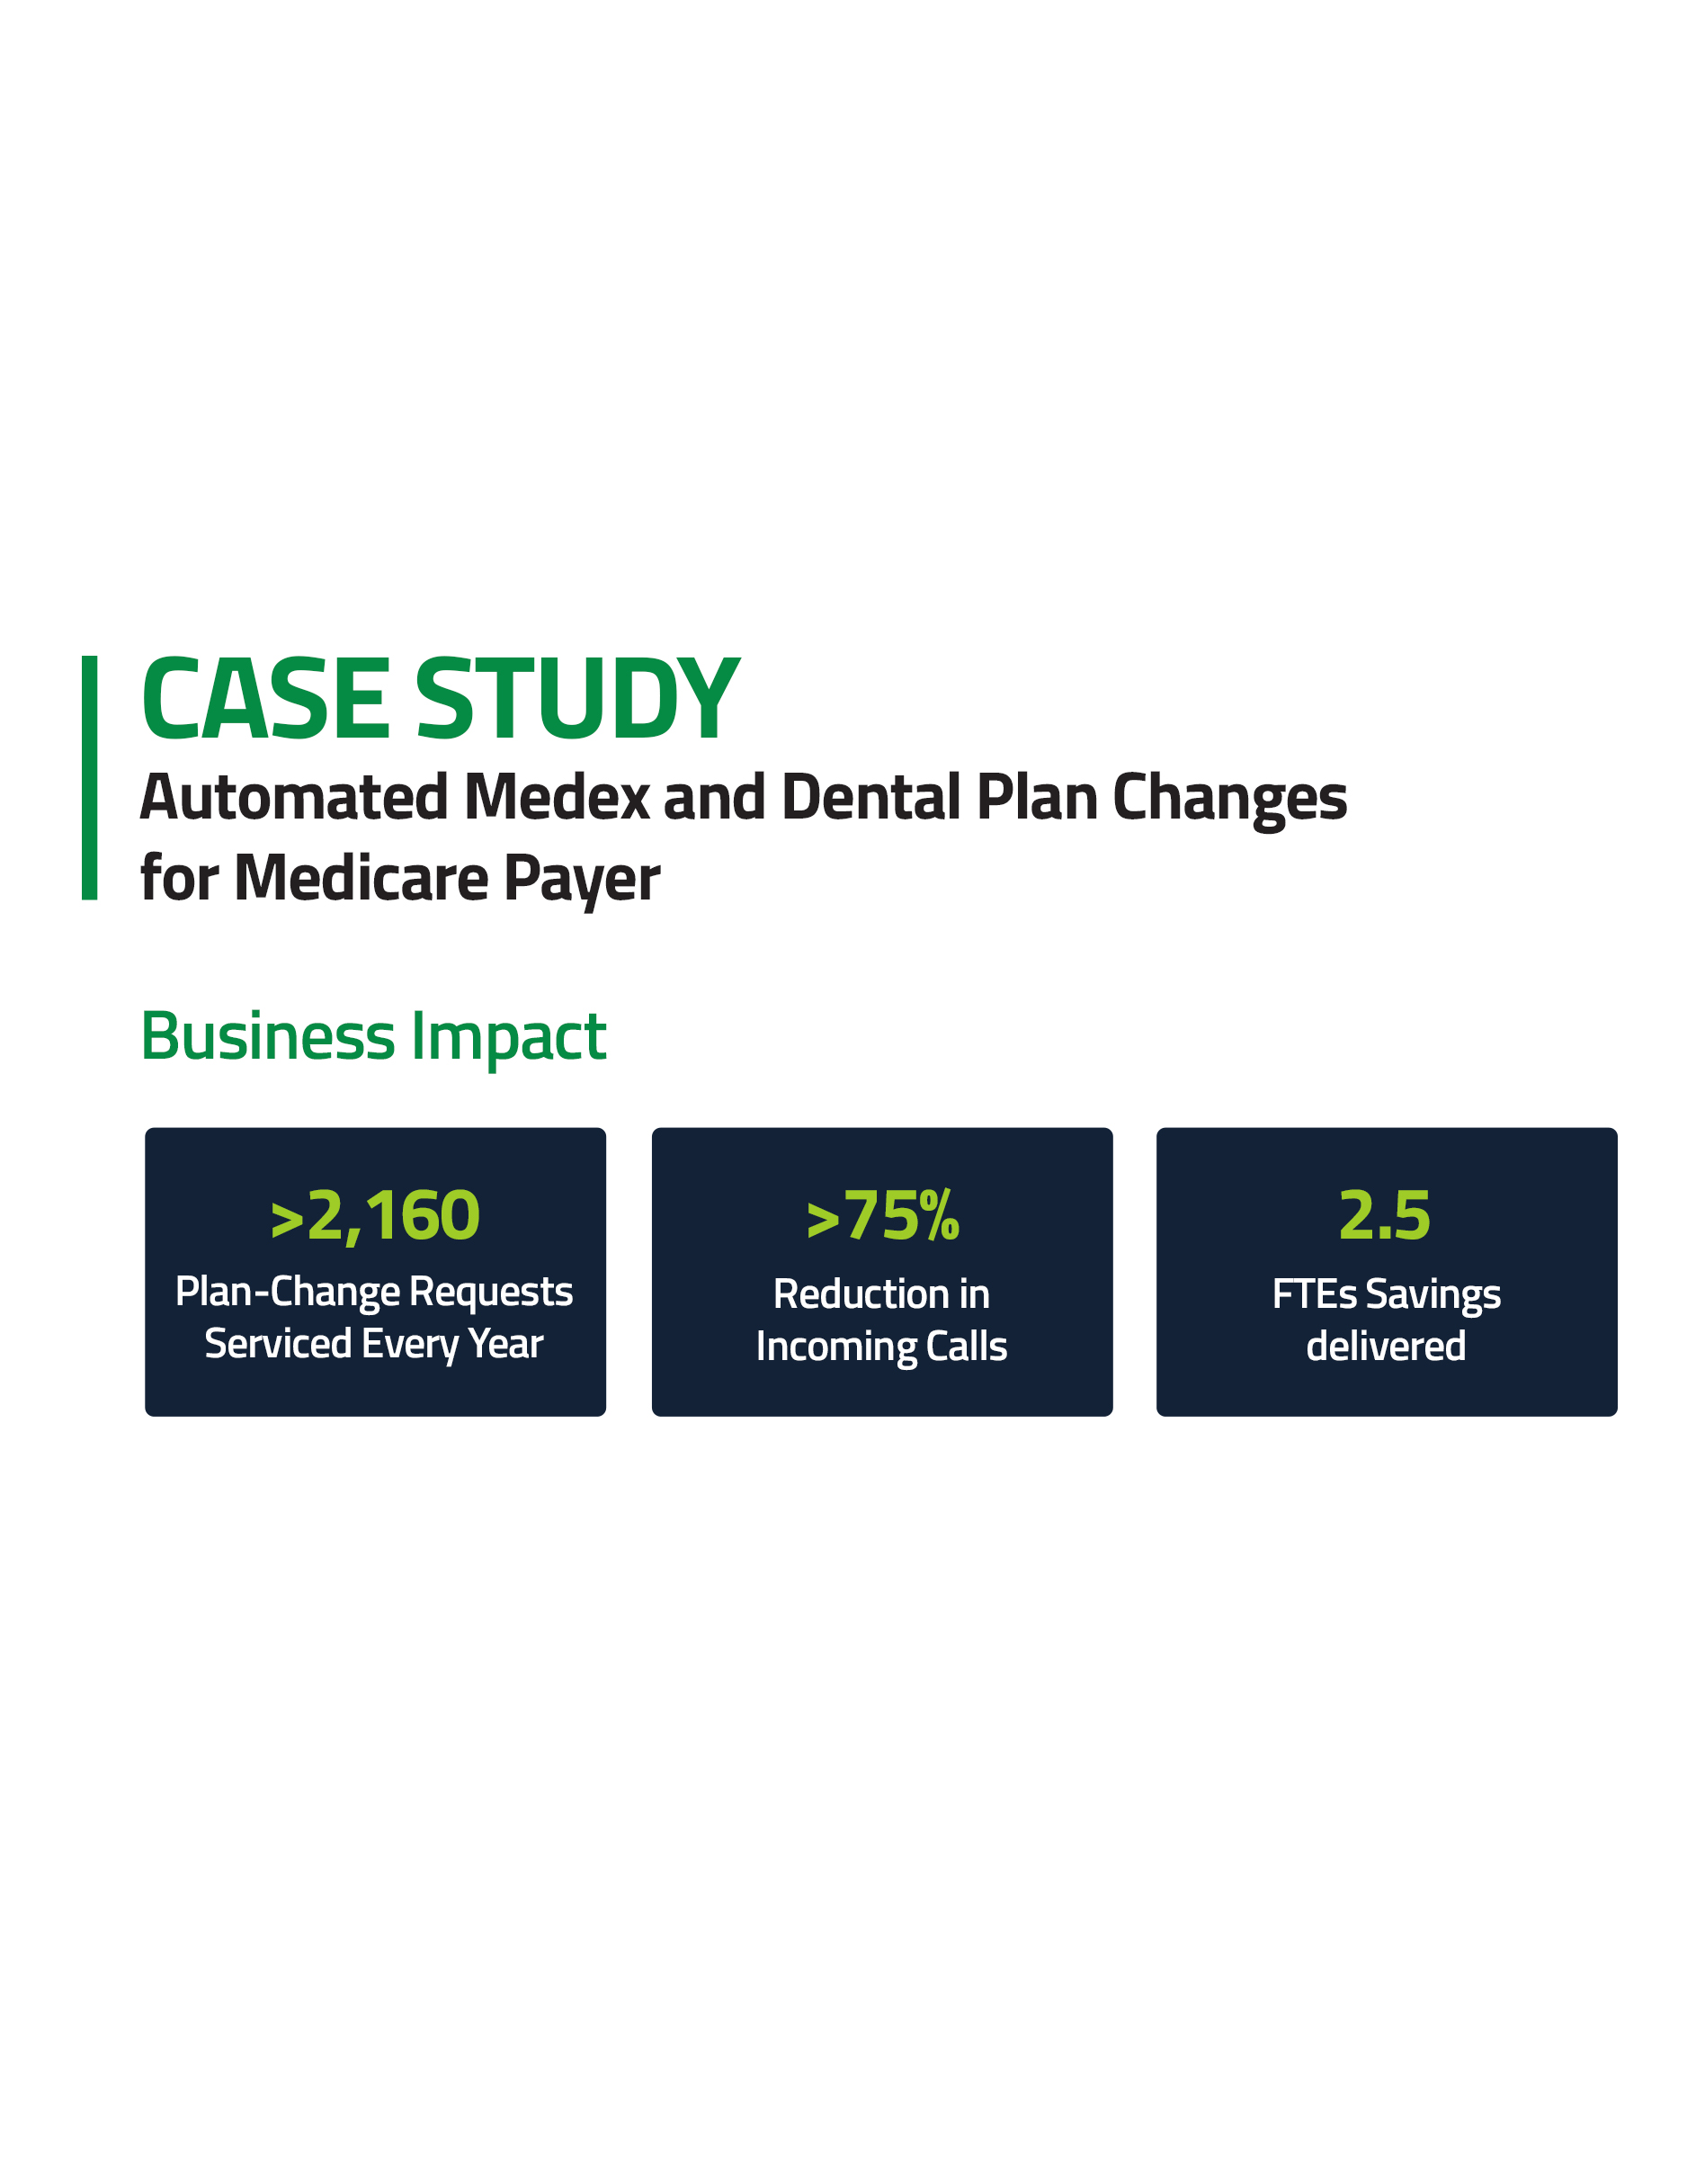 1643620542Automated Medex and Dental Plan Changes-thumb.jpg